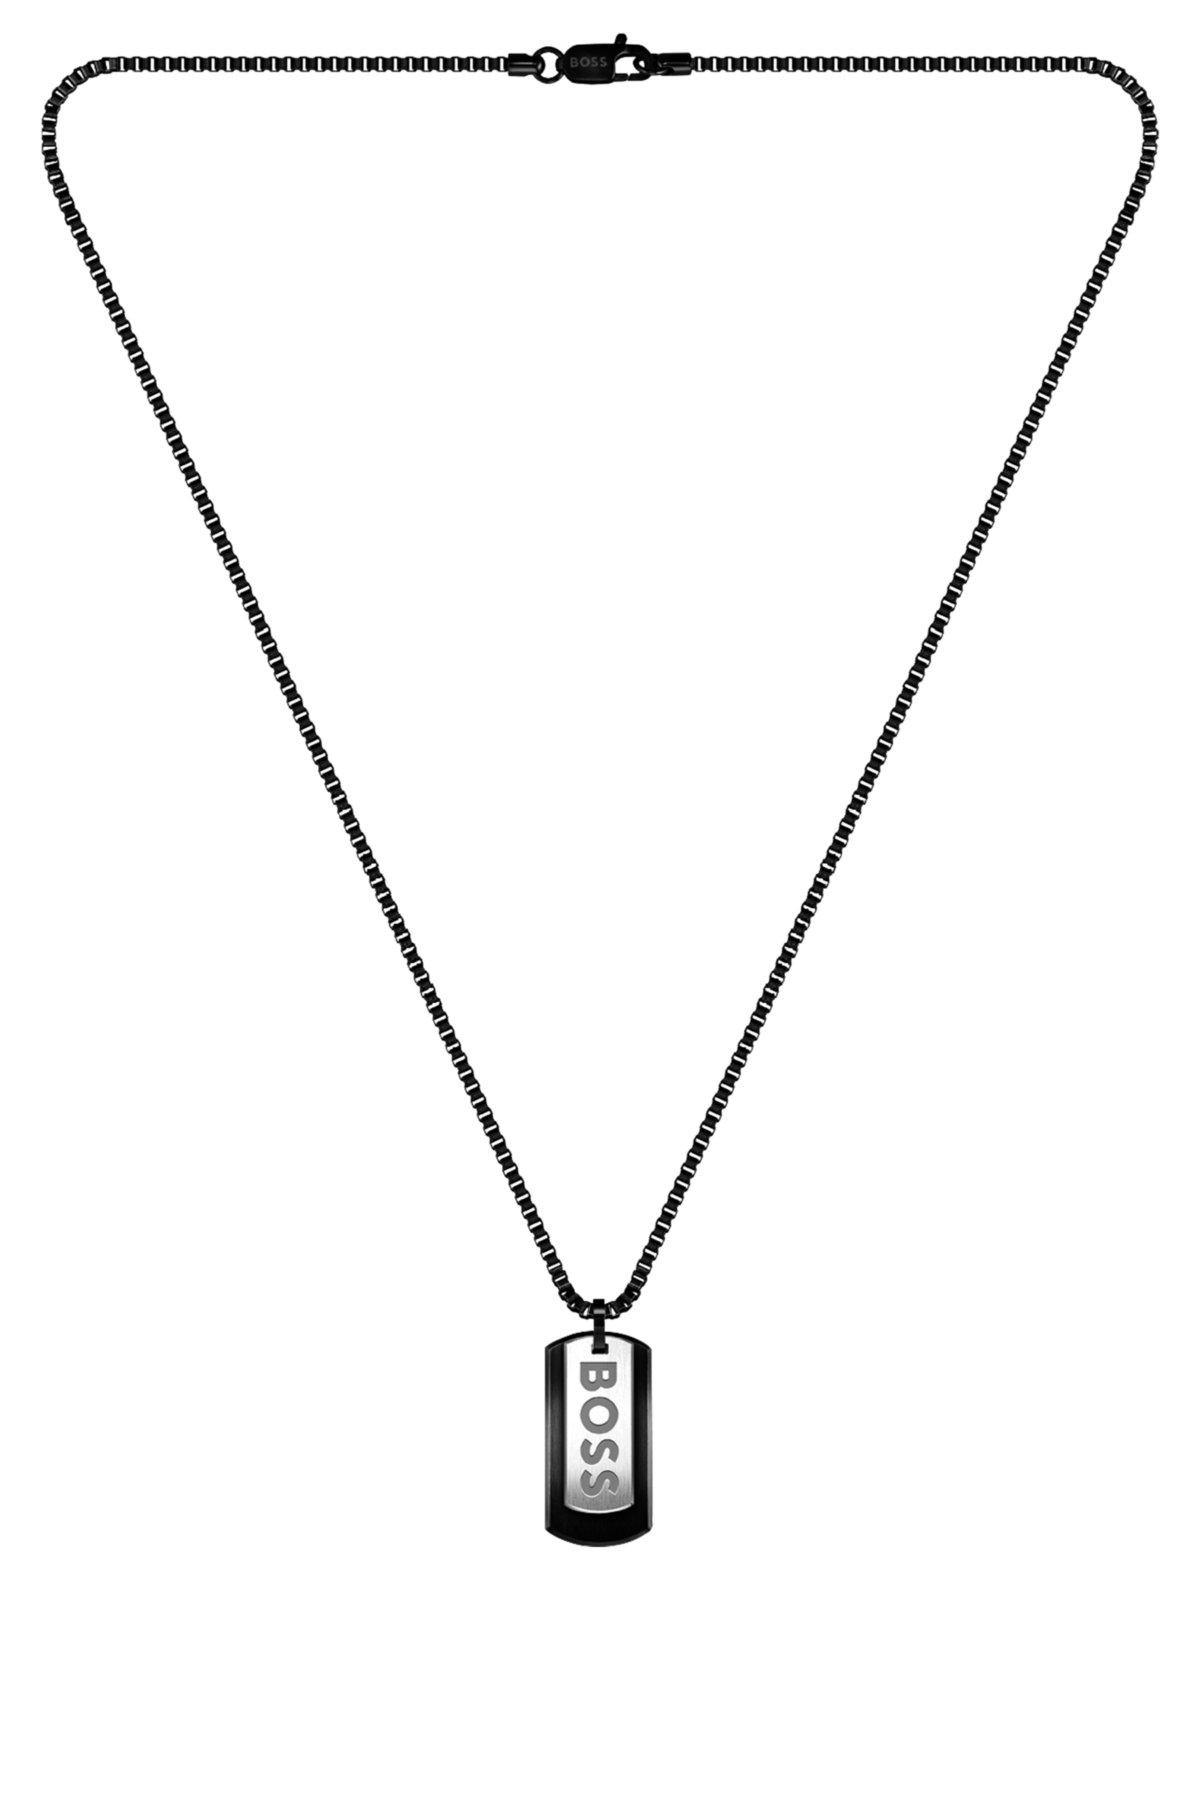 Black-steel necklace with double-tag logo pendant, Silver tone